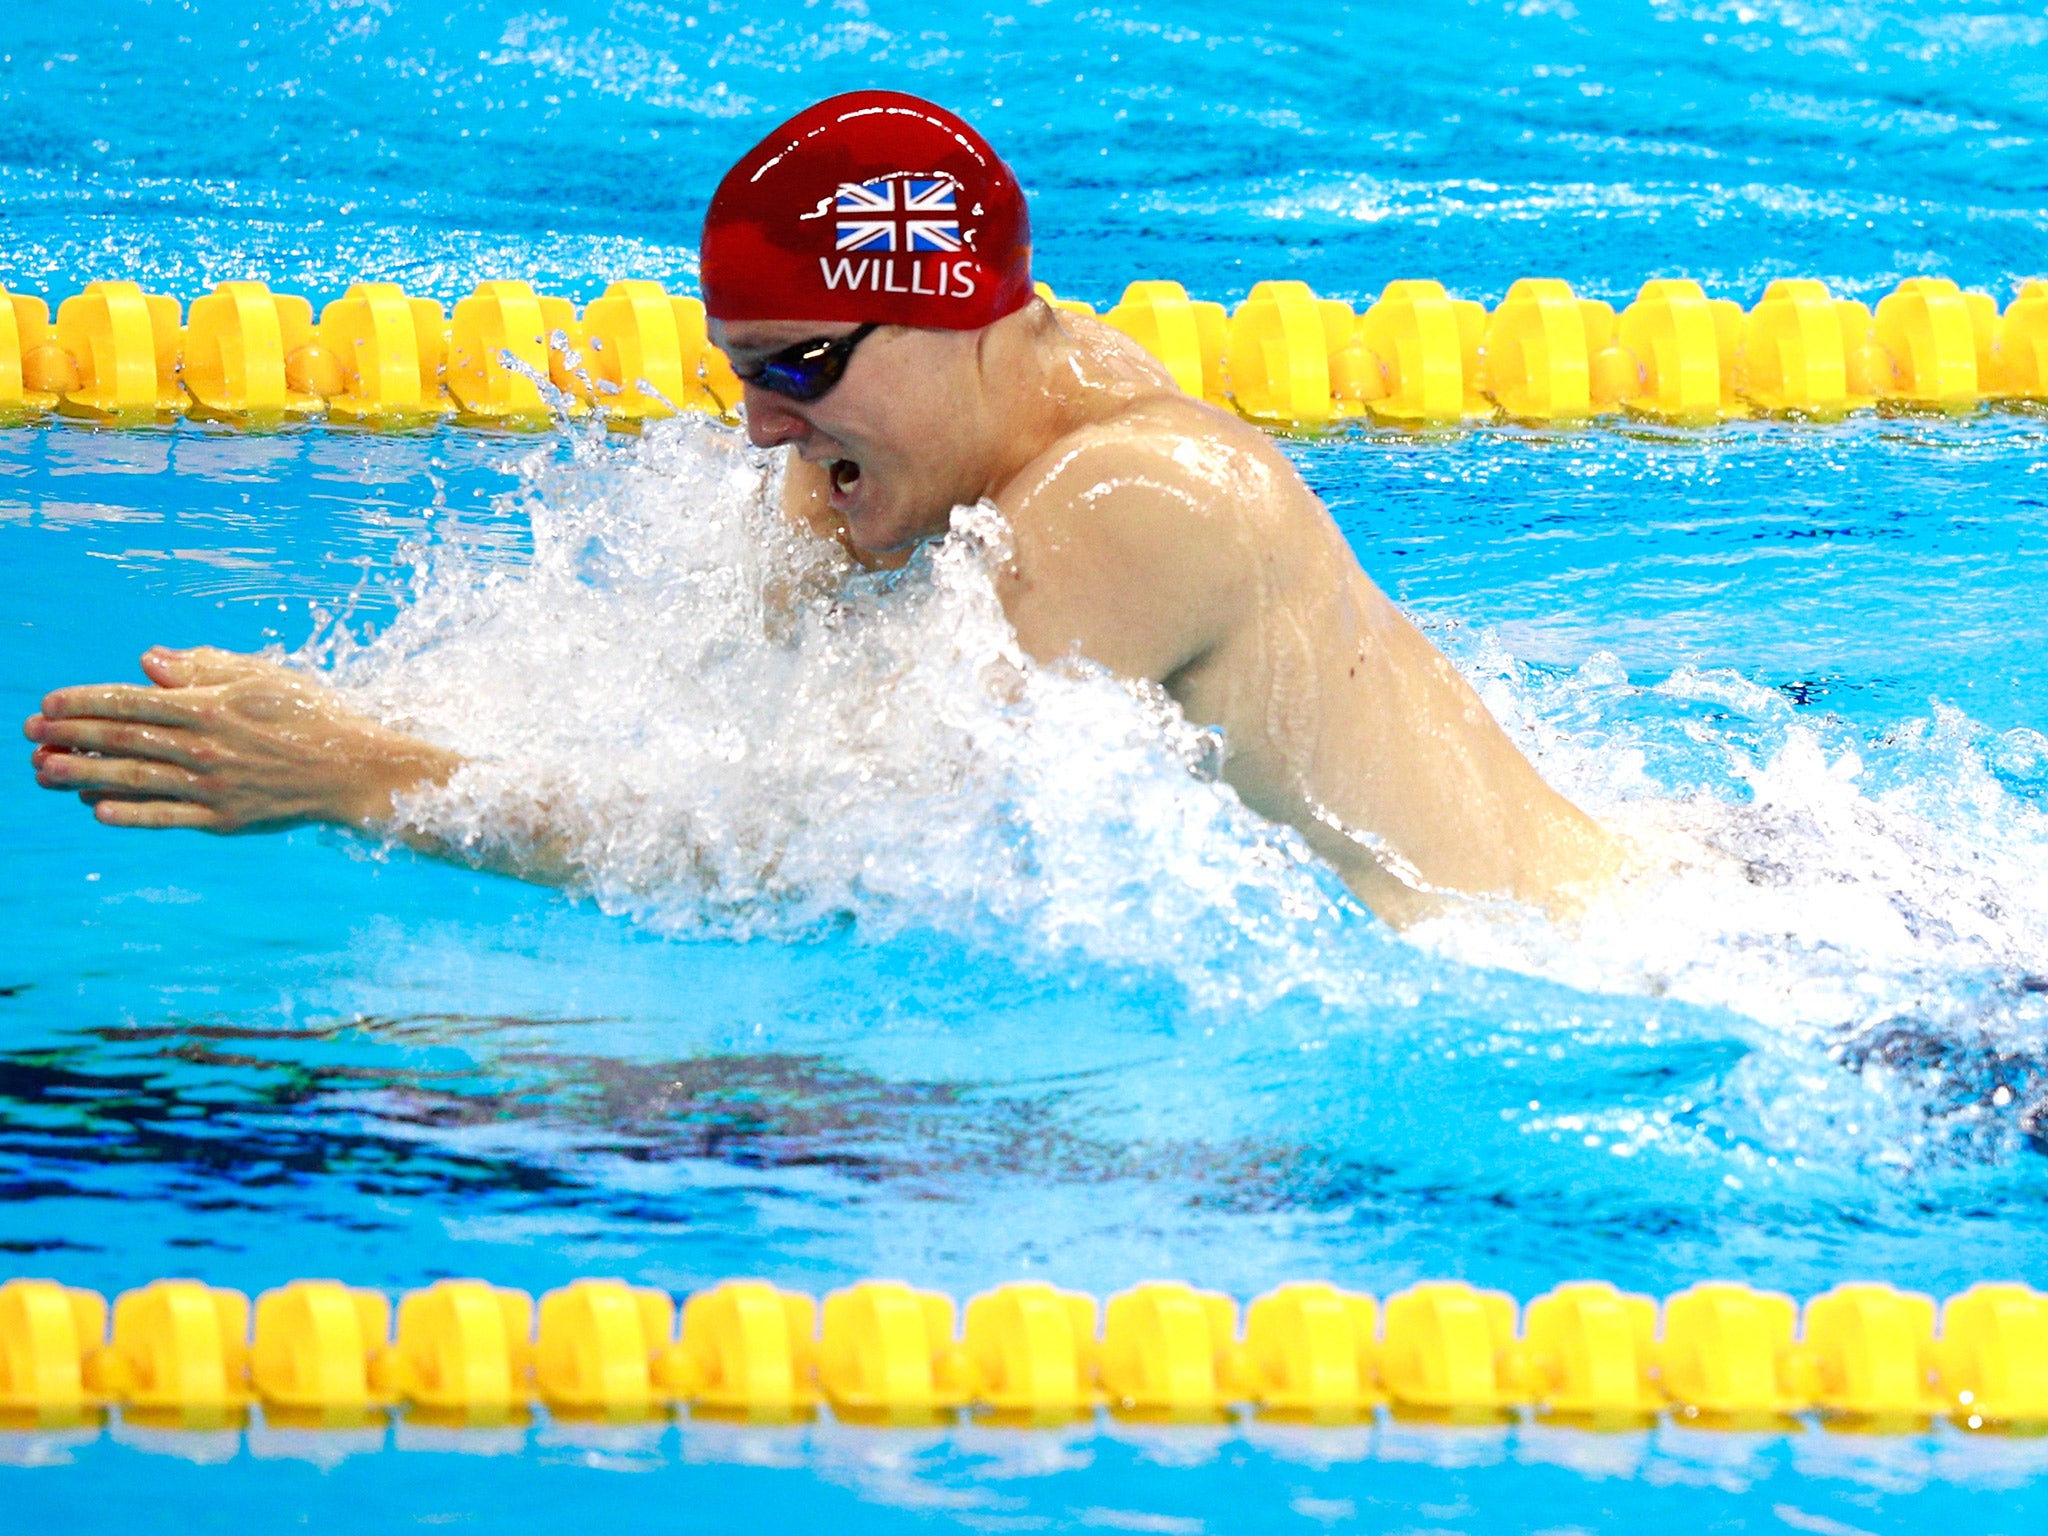 Andrew Willis was left frustrated with a fourth place finish in the men's 200m breaststroke final